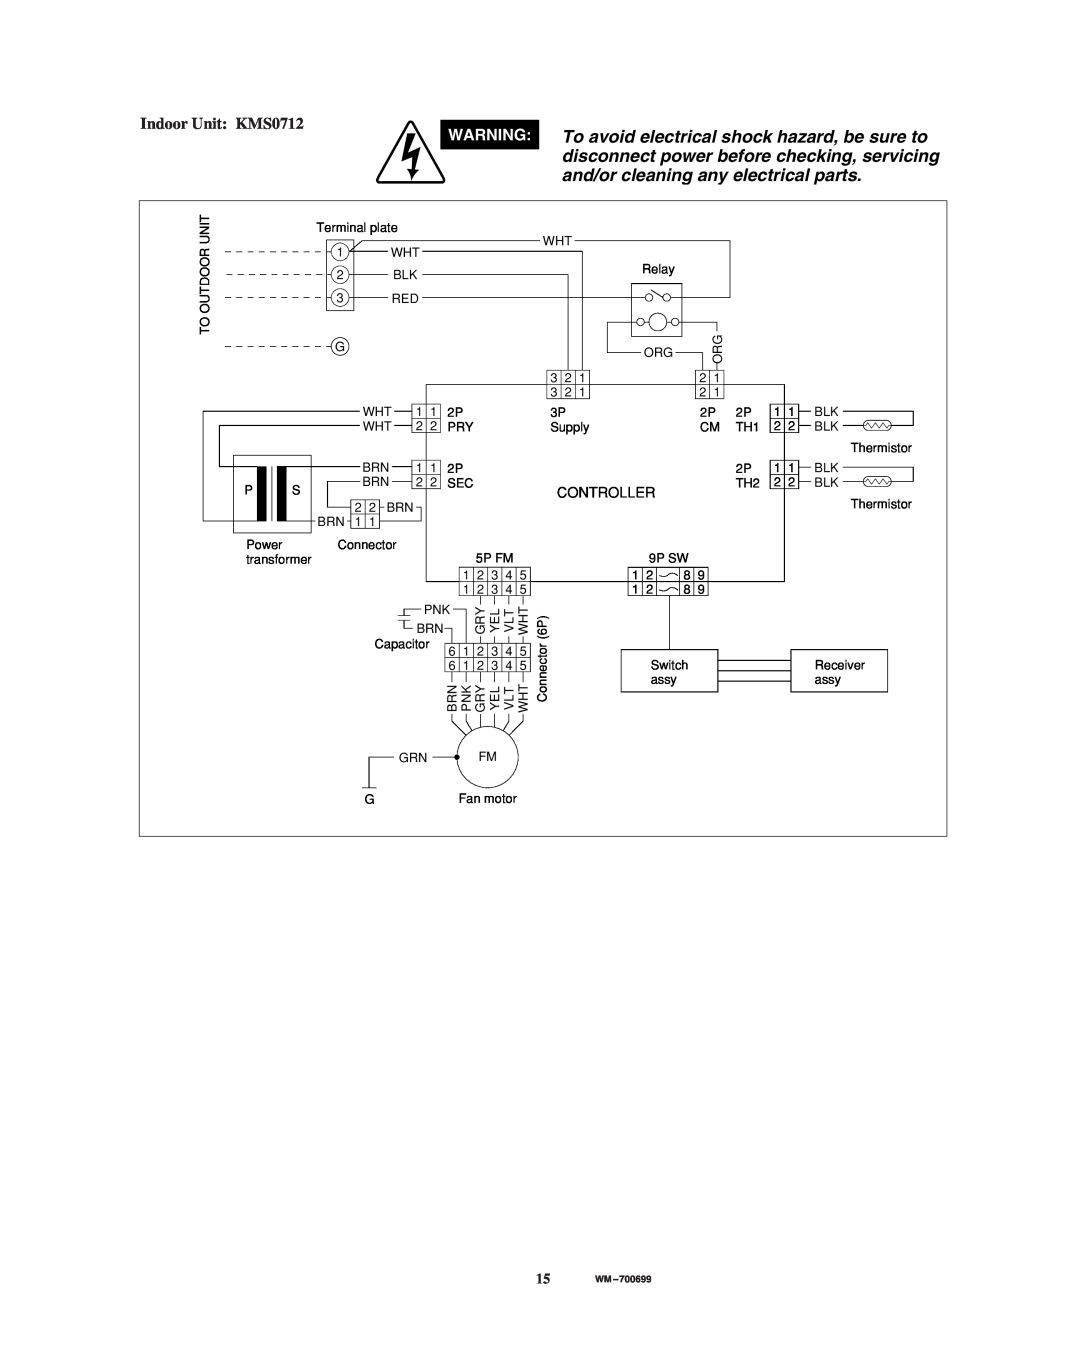 Sanyo KMS1812, CM3212 service manual Indoor Unit KMS0712, Controller 